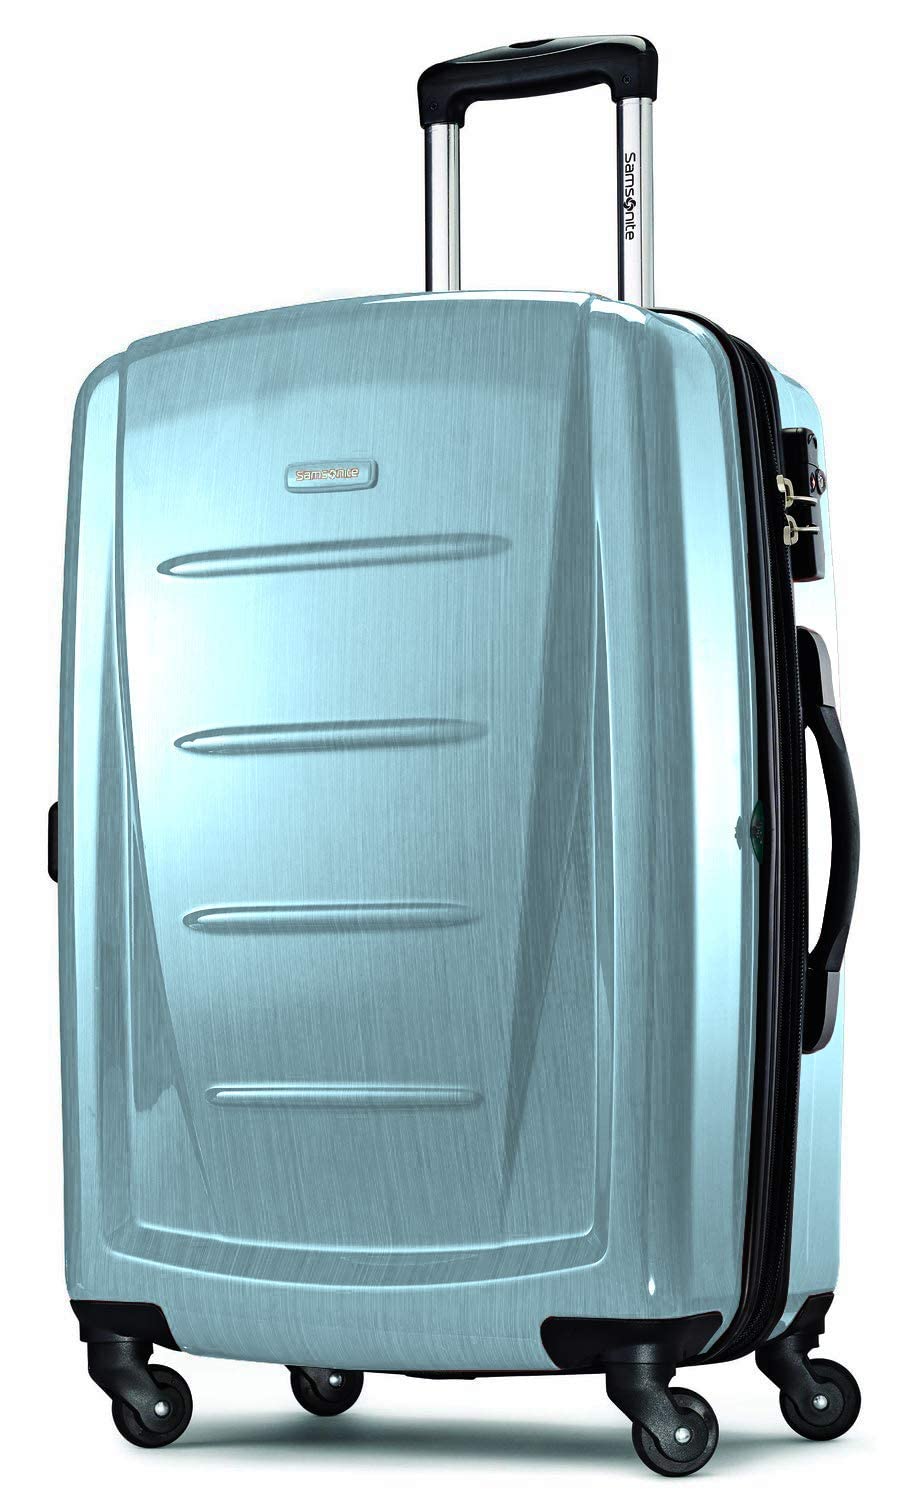 Samsonite Winfield 2 Hardside Expandable Luggage with Spinner Wheels (Ice Blue, 2-Piece Set (20/28))